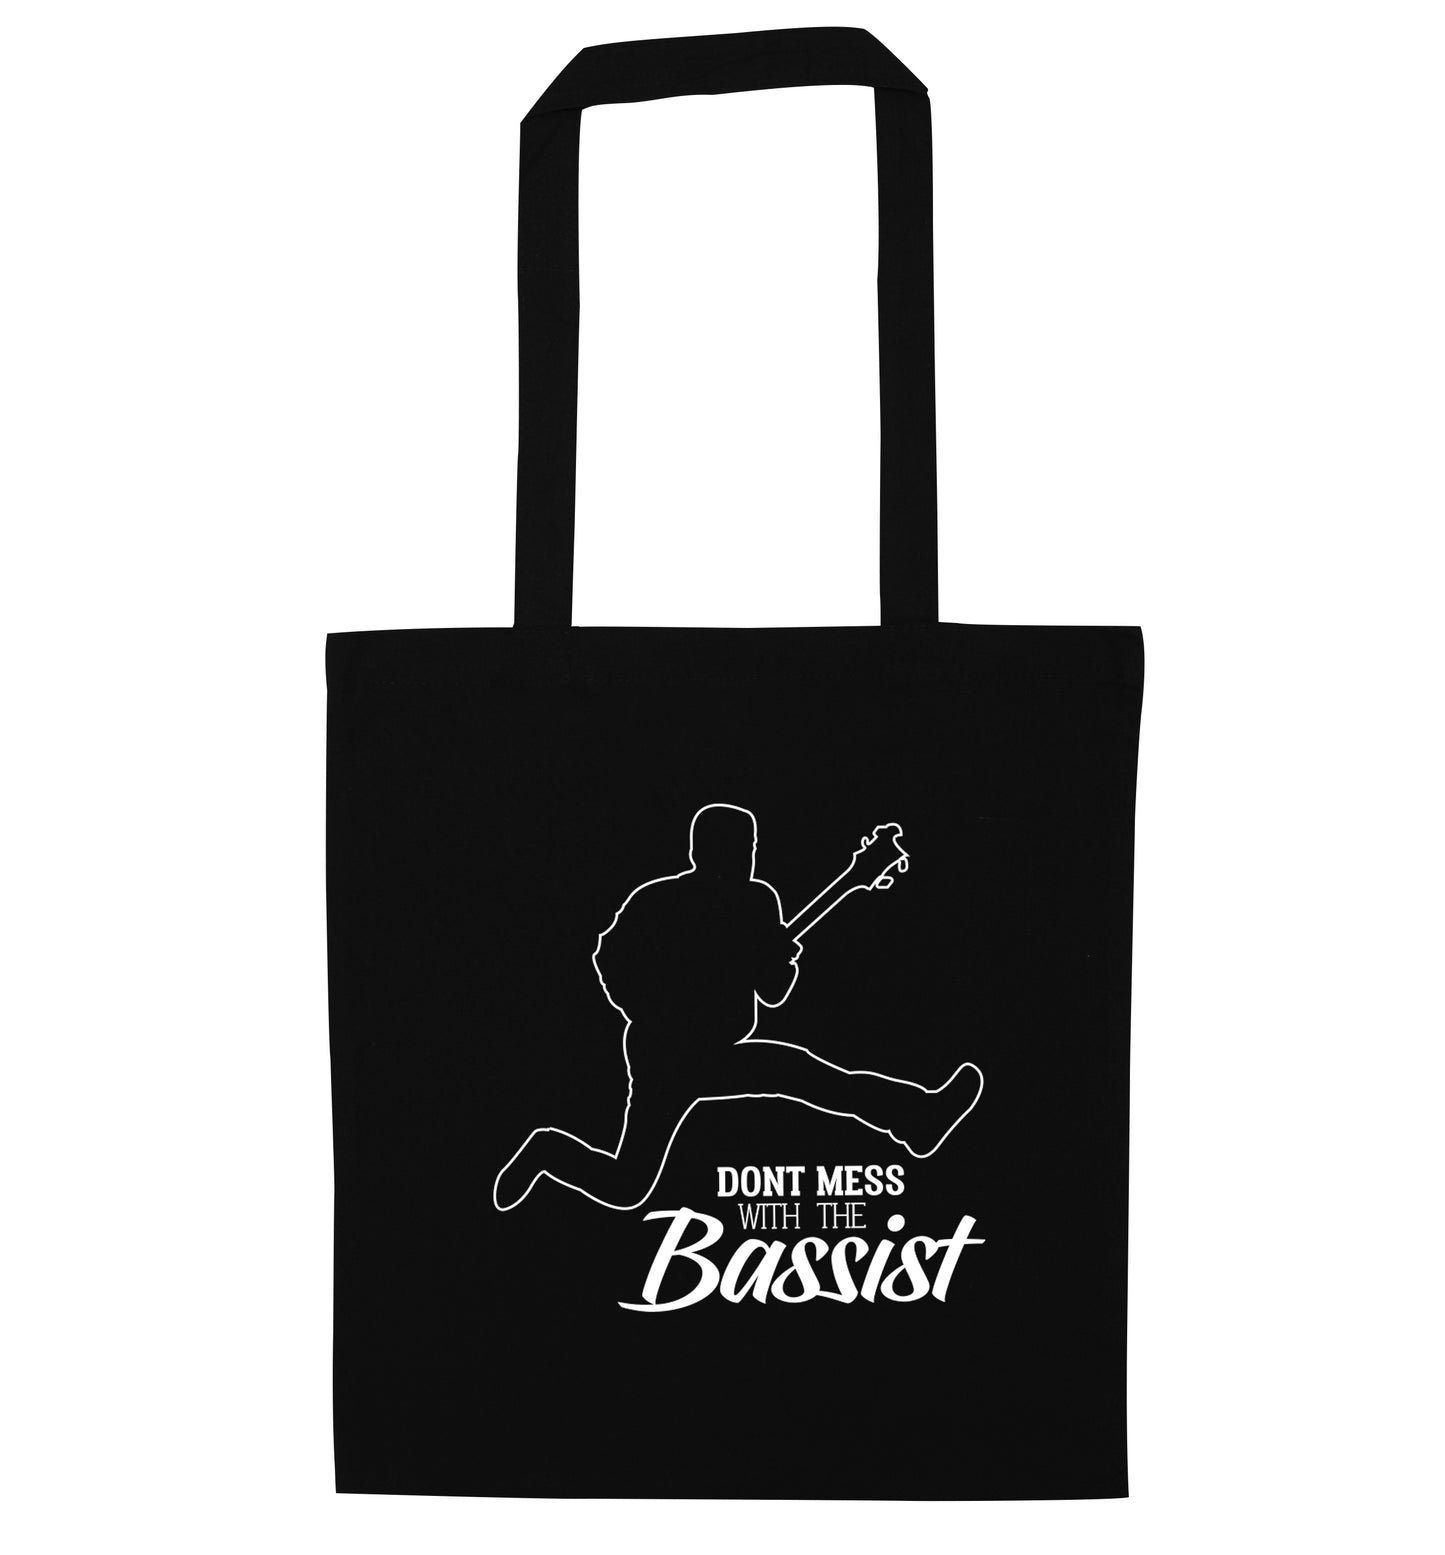 Dont mess with the bassist black tote bag